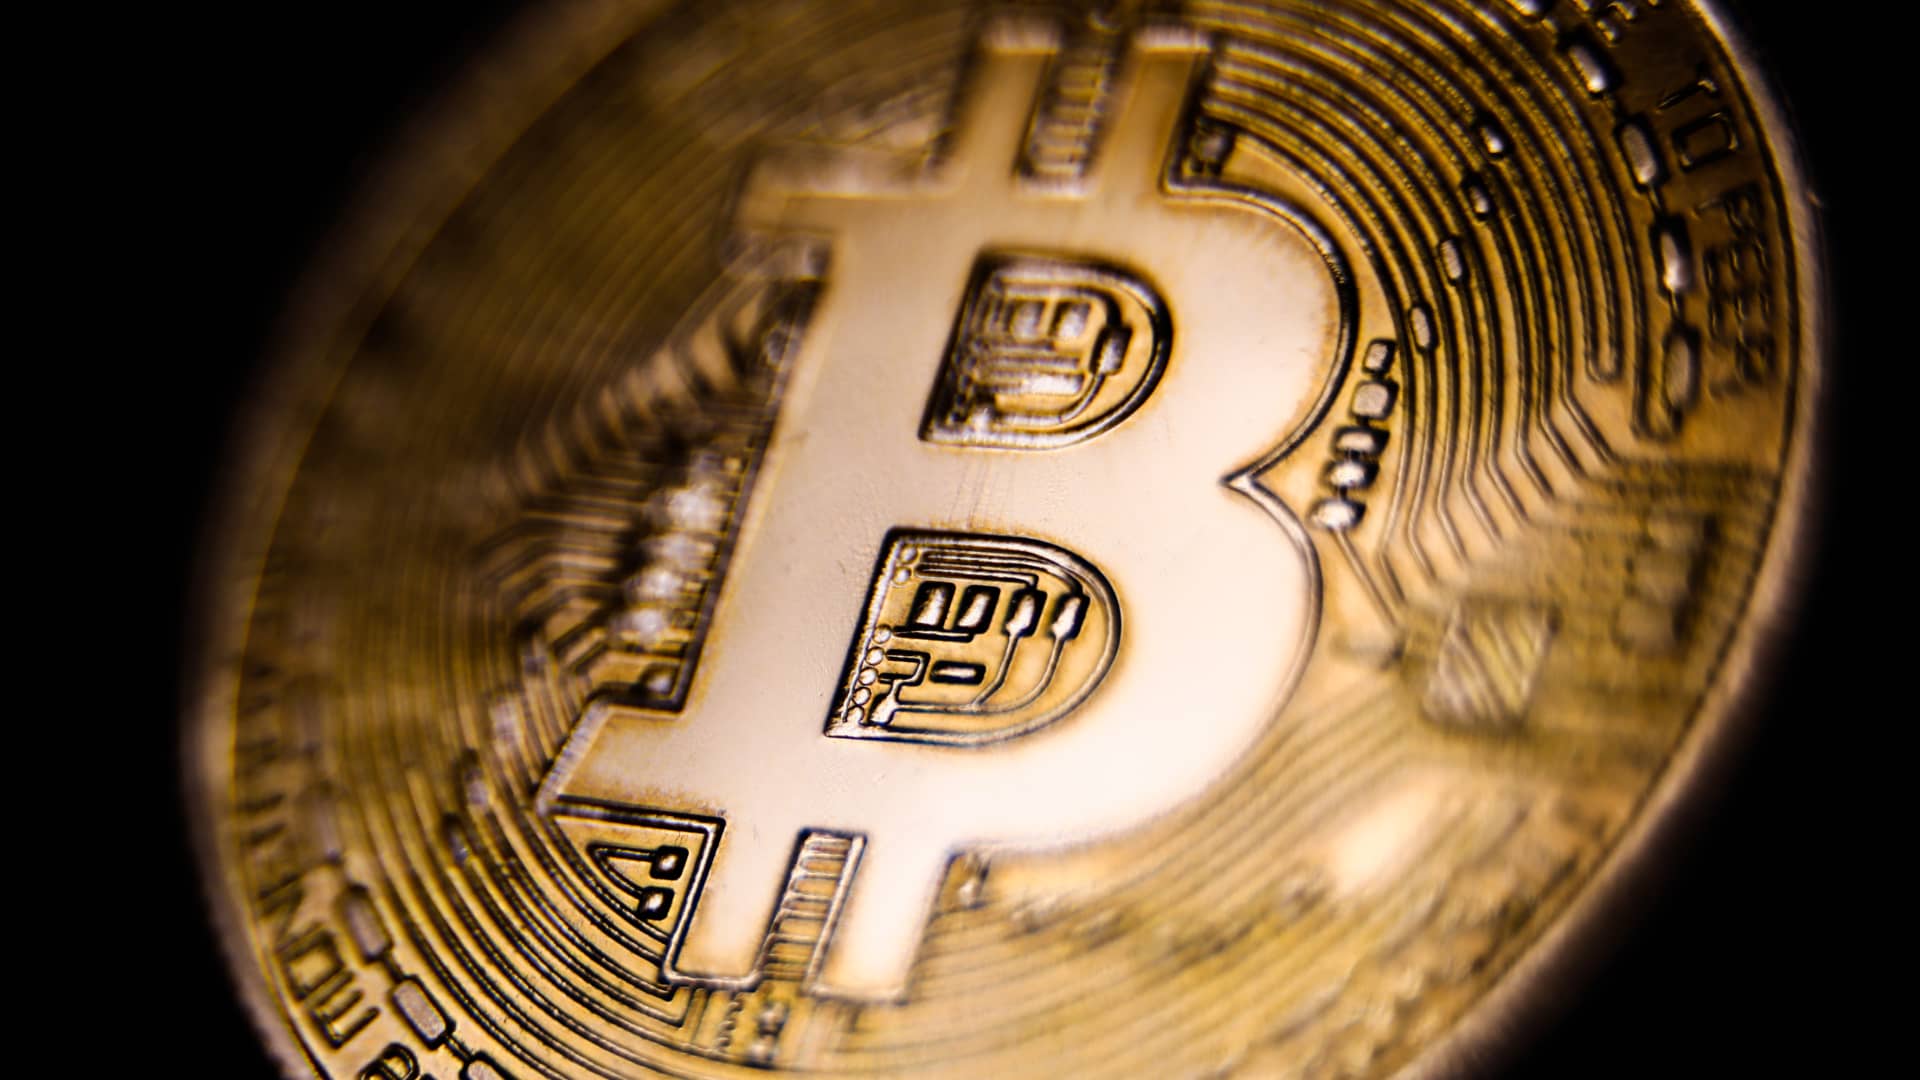 Bitcoin drops below $35,000 over the weekend, extending Friday’s losses